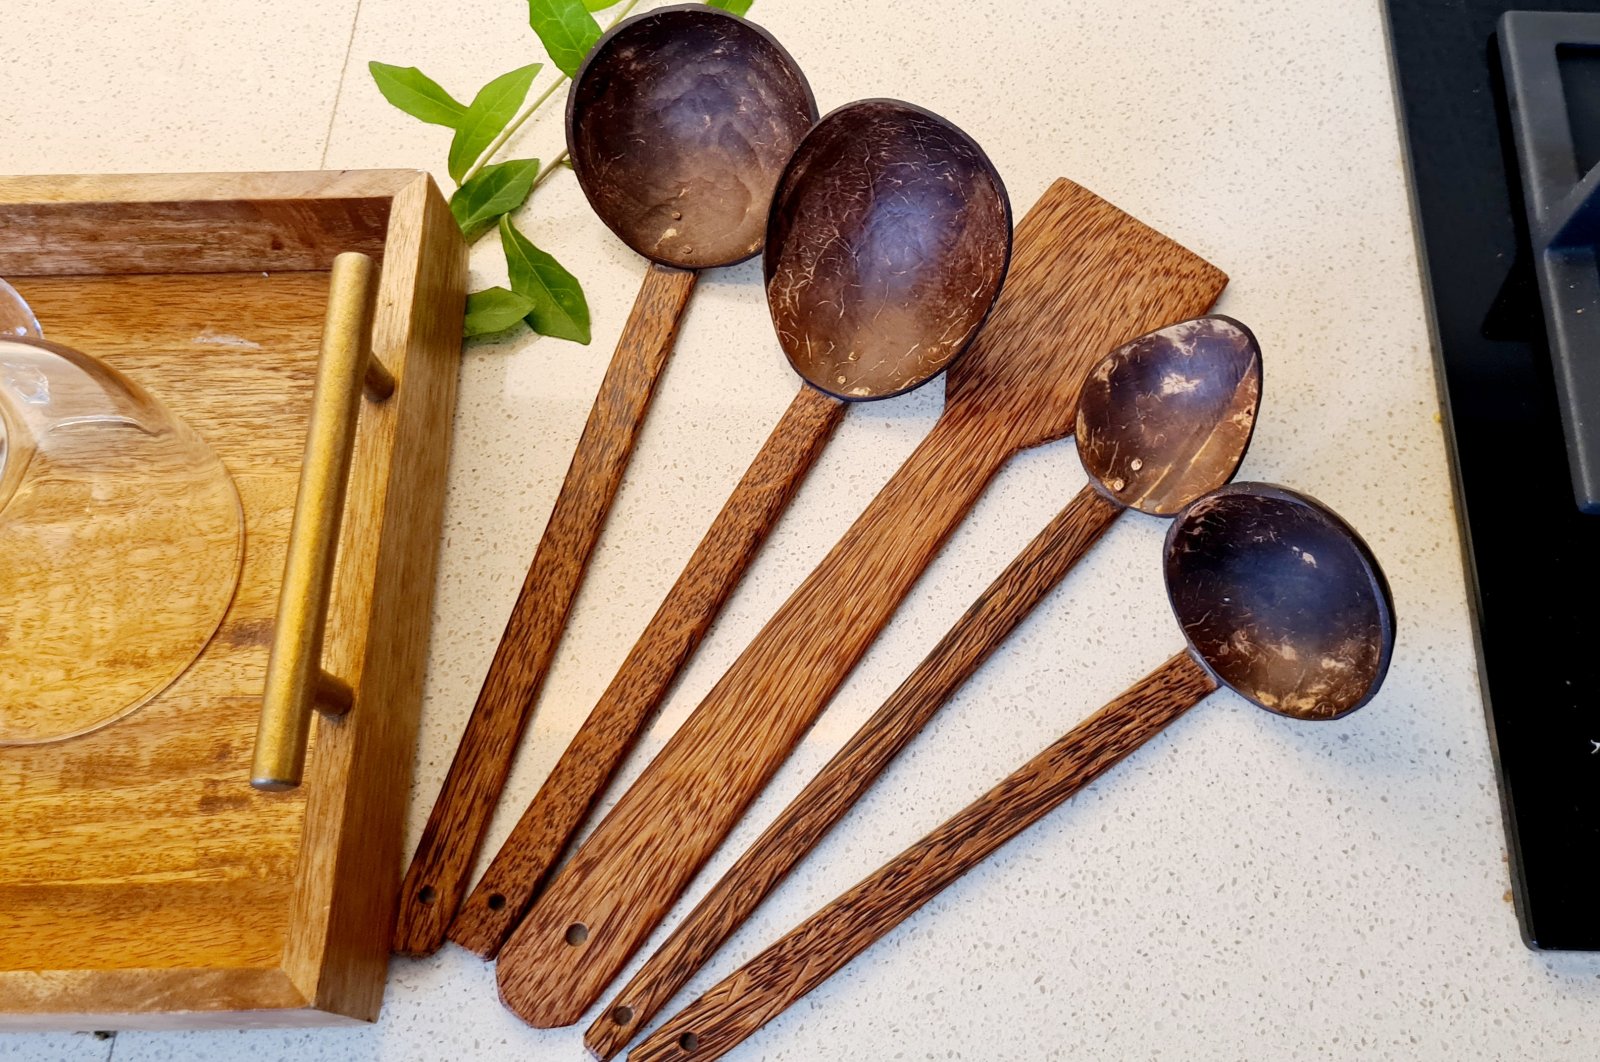 Kitchen utensils made from recycled coconut shells. (Photo courtesy of Thenga)